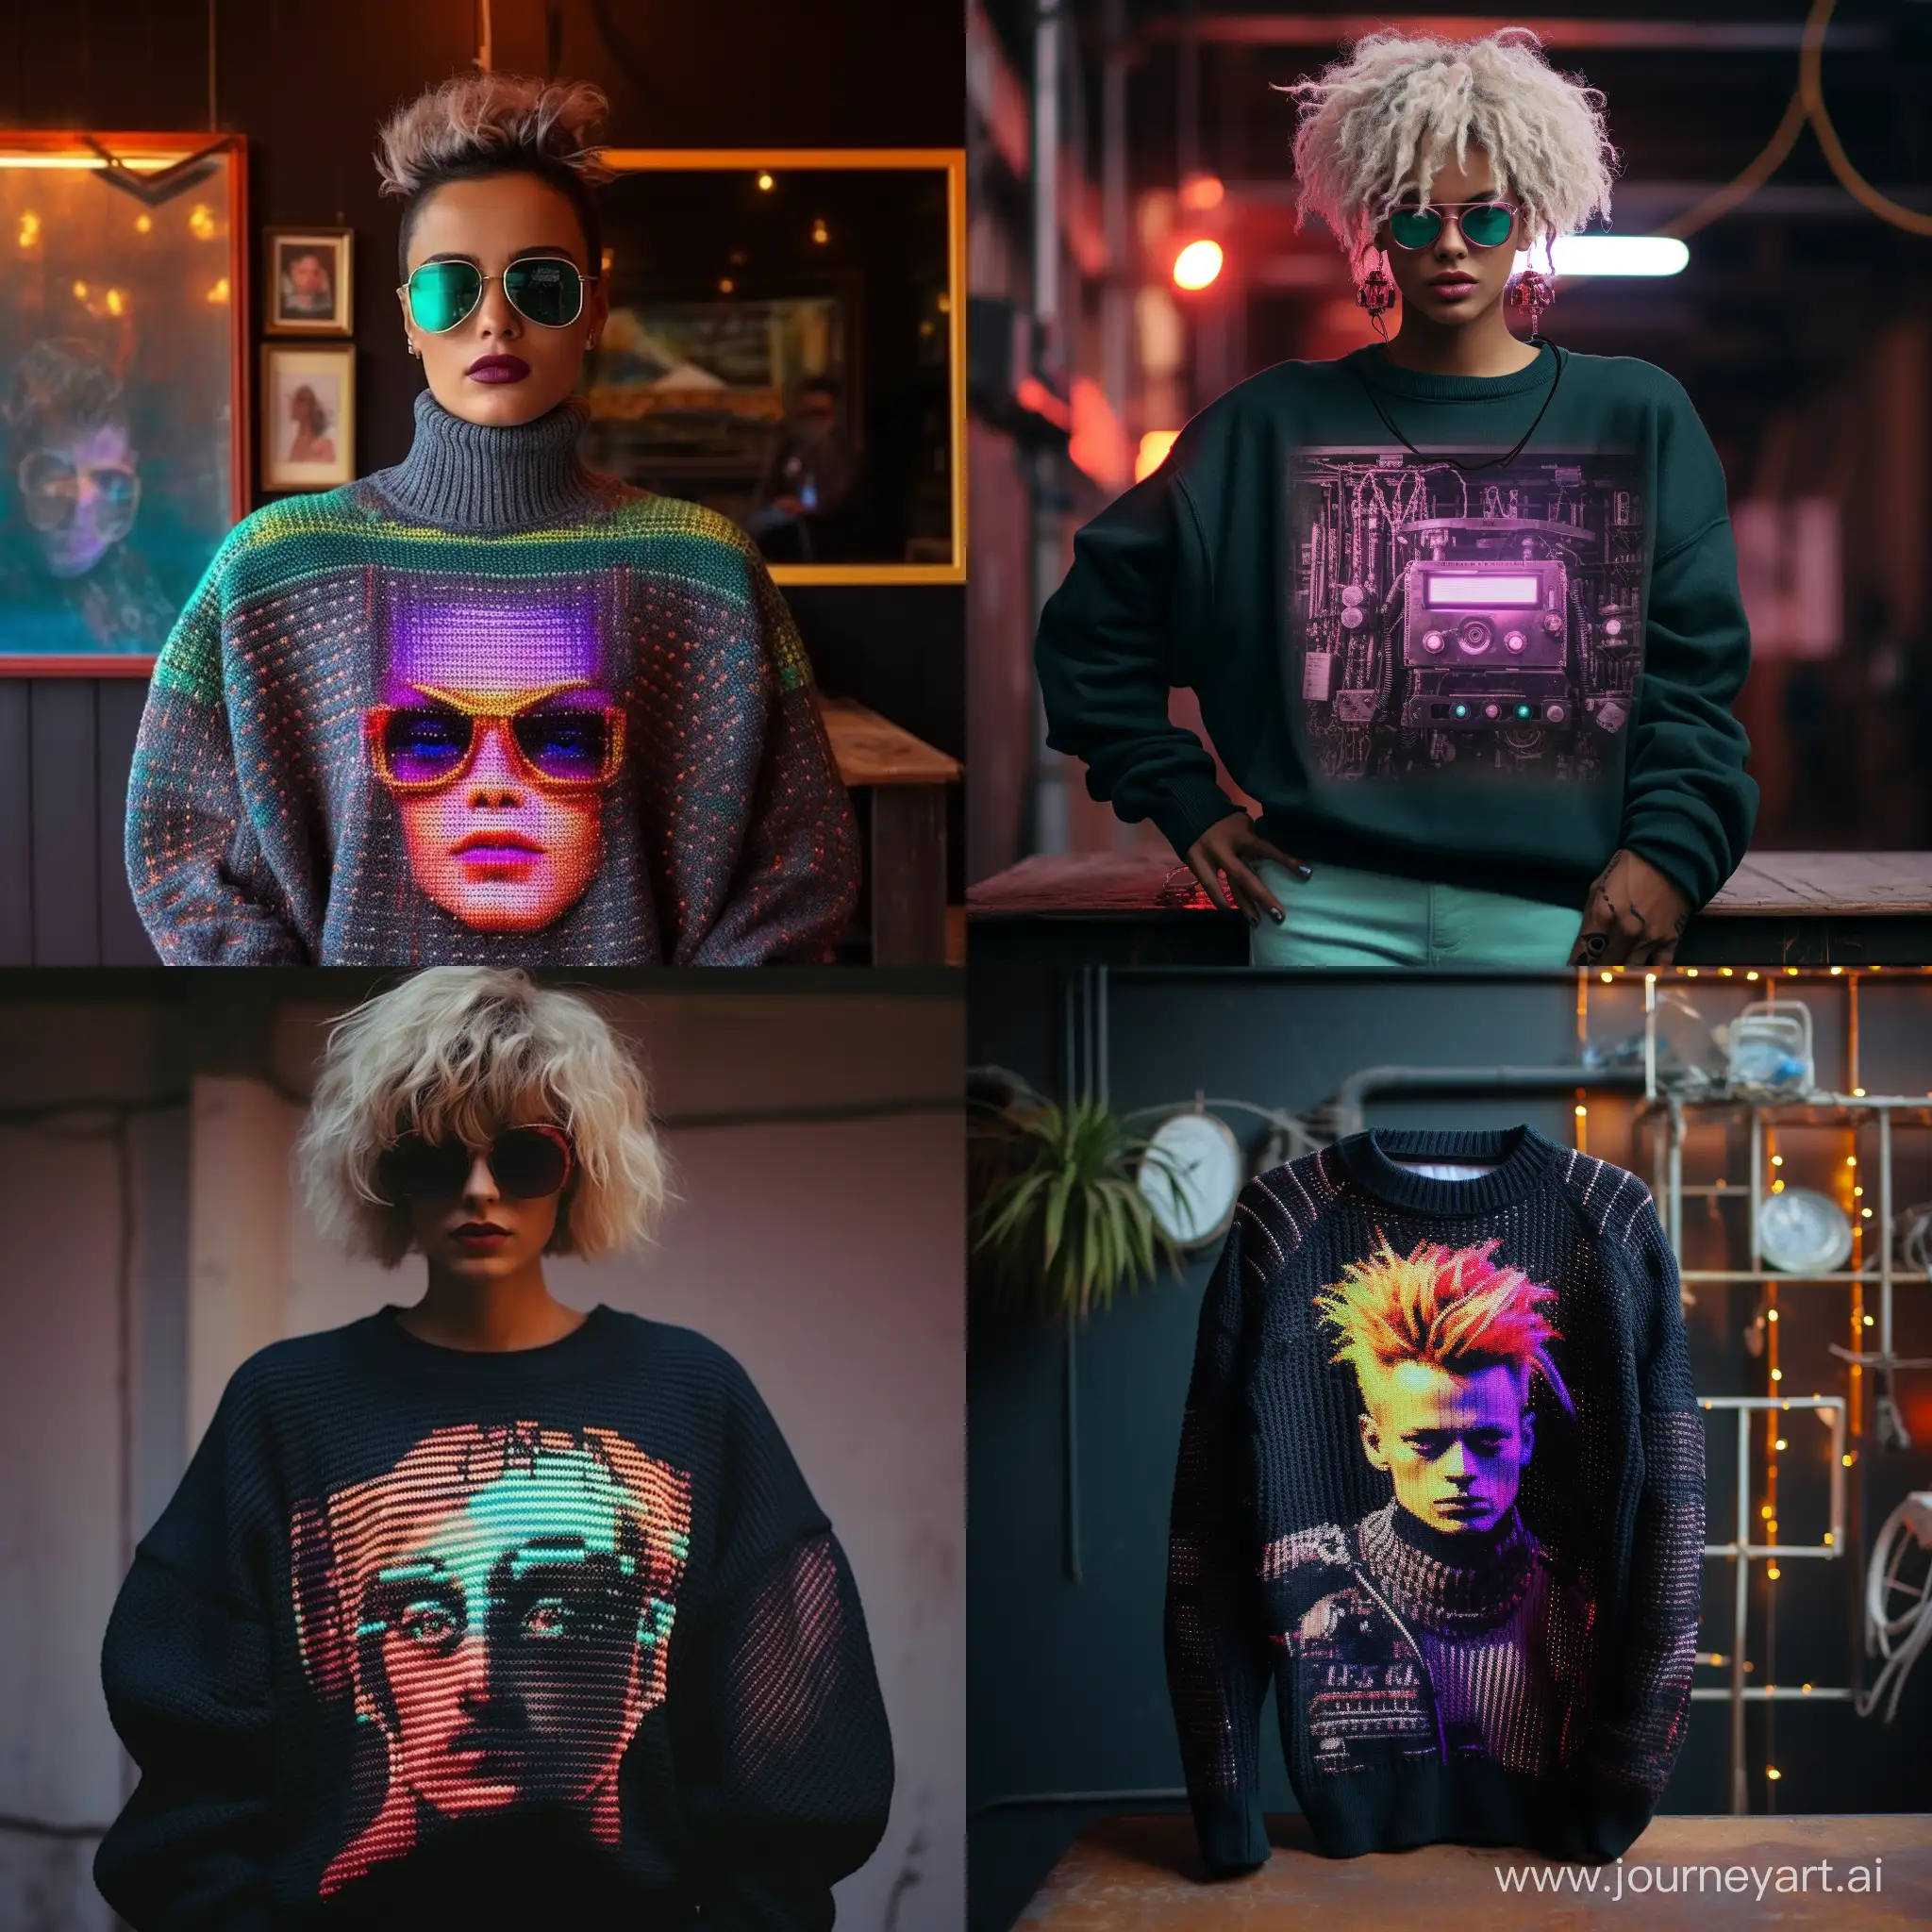 A photo of an oversize knitted sweater with a flat image on the sweater of a computer that controls the world, 80s punk style, cyberpunk films, without people in the picture